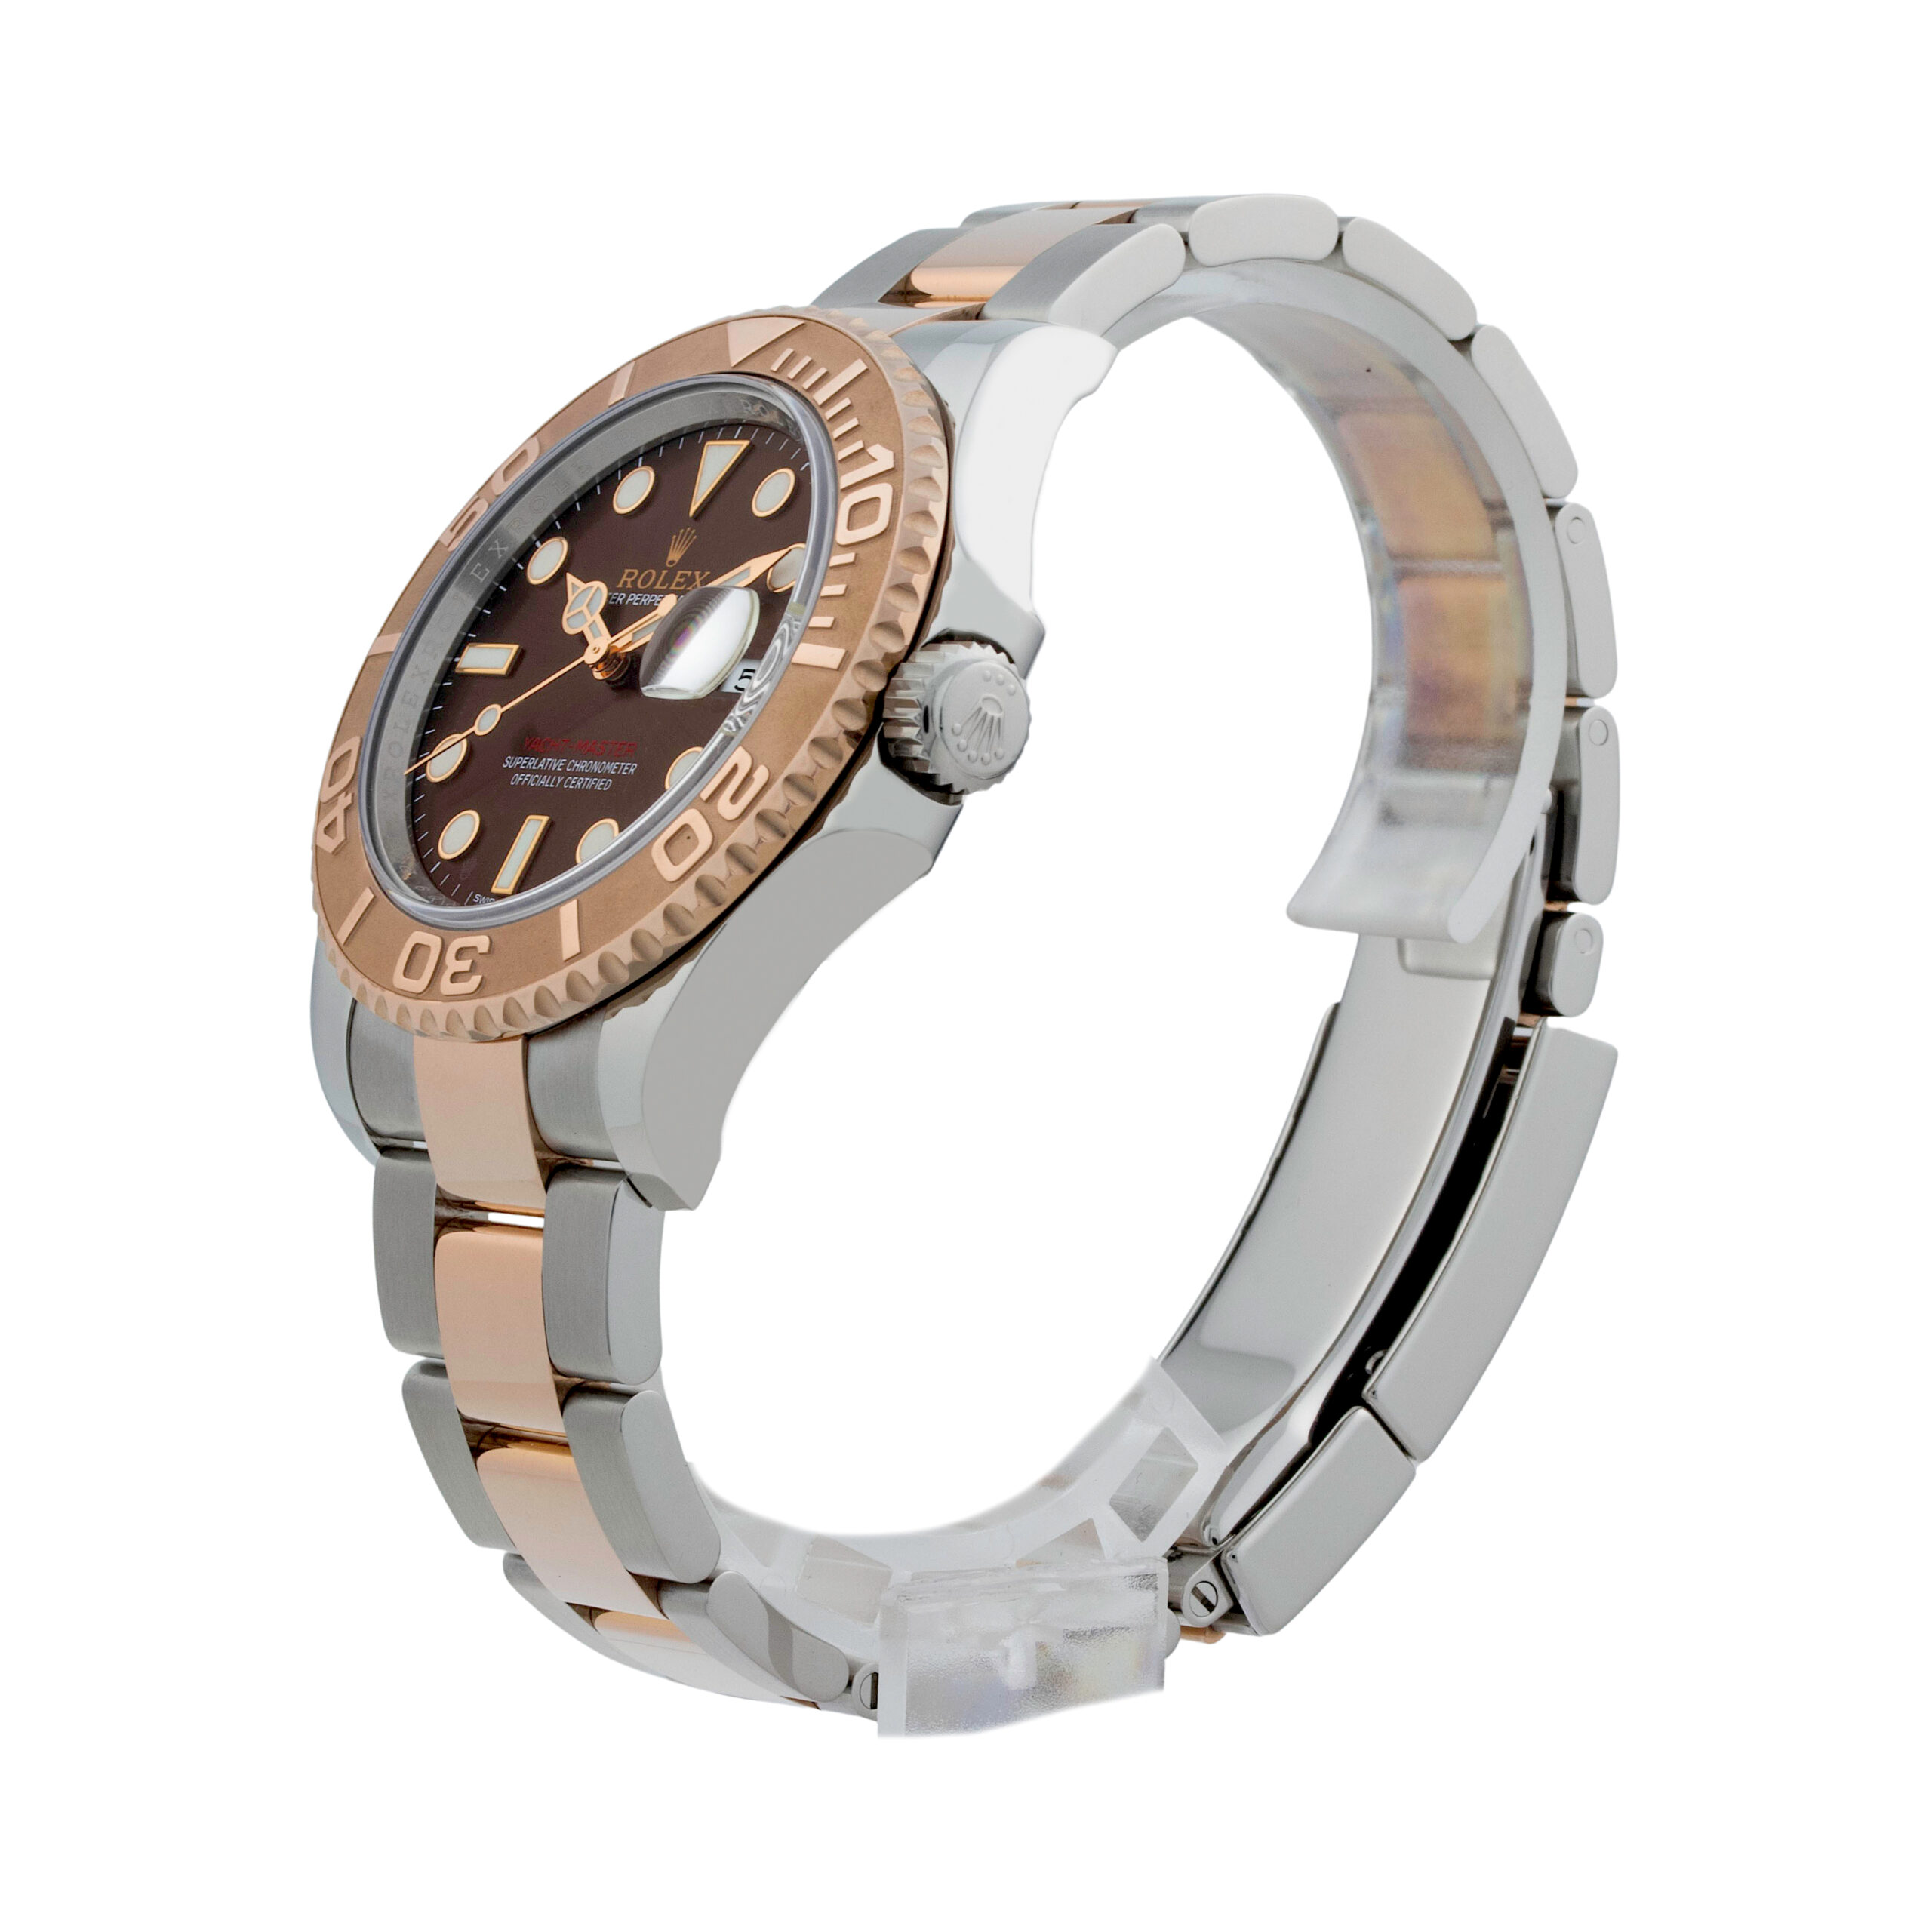 Rolex Yacht-Master 116621 40mm Two-Tone